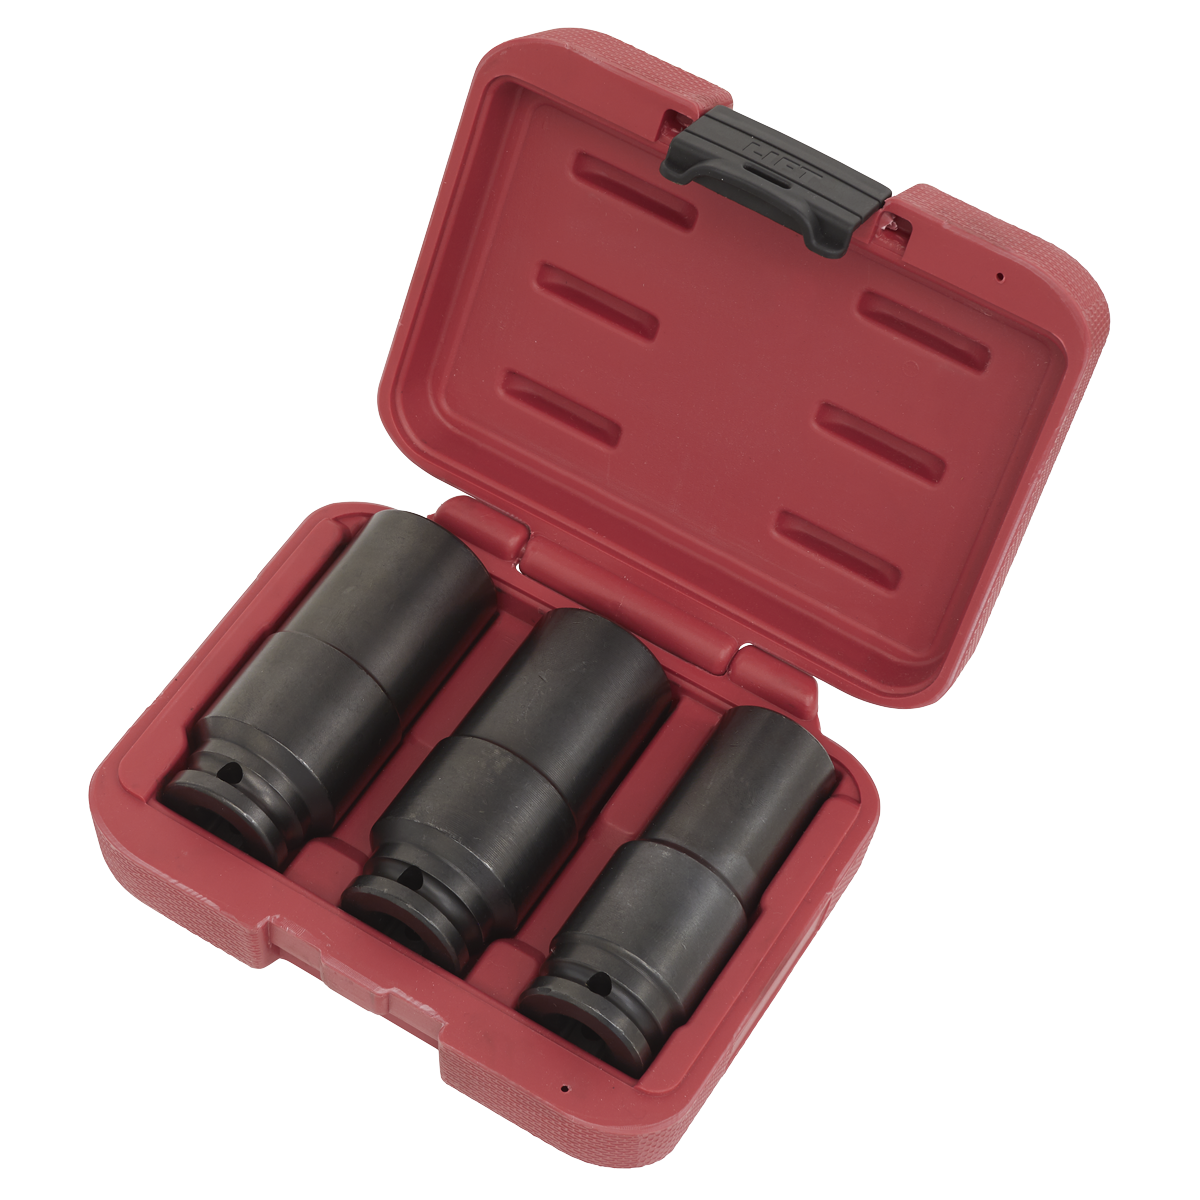 Sealey SX319 Deep Weighted Impact Socket Set 1/2"Sq Drive 3pc